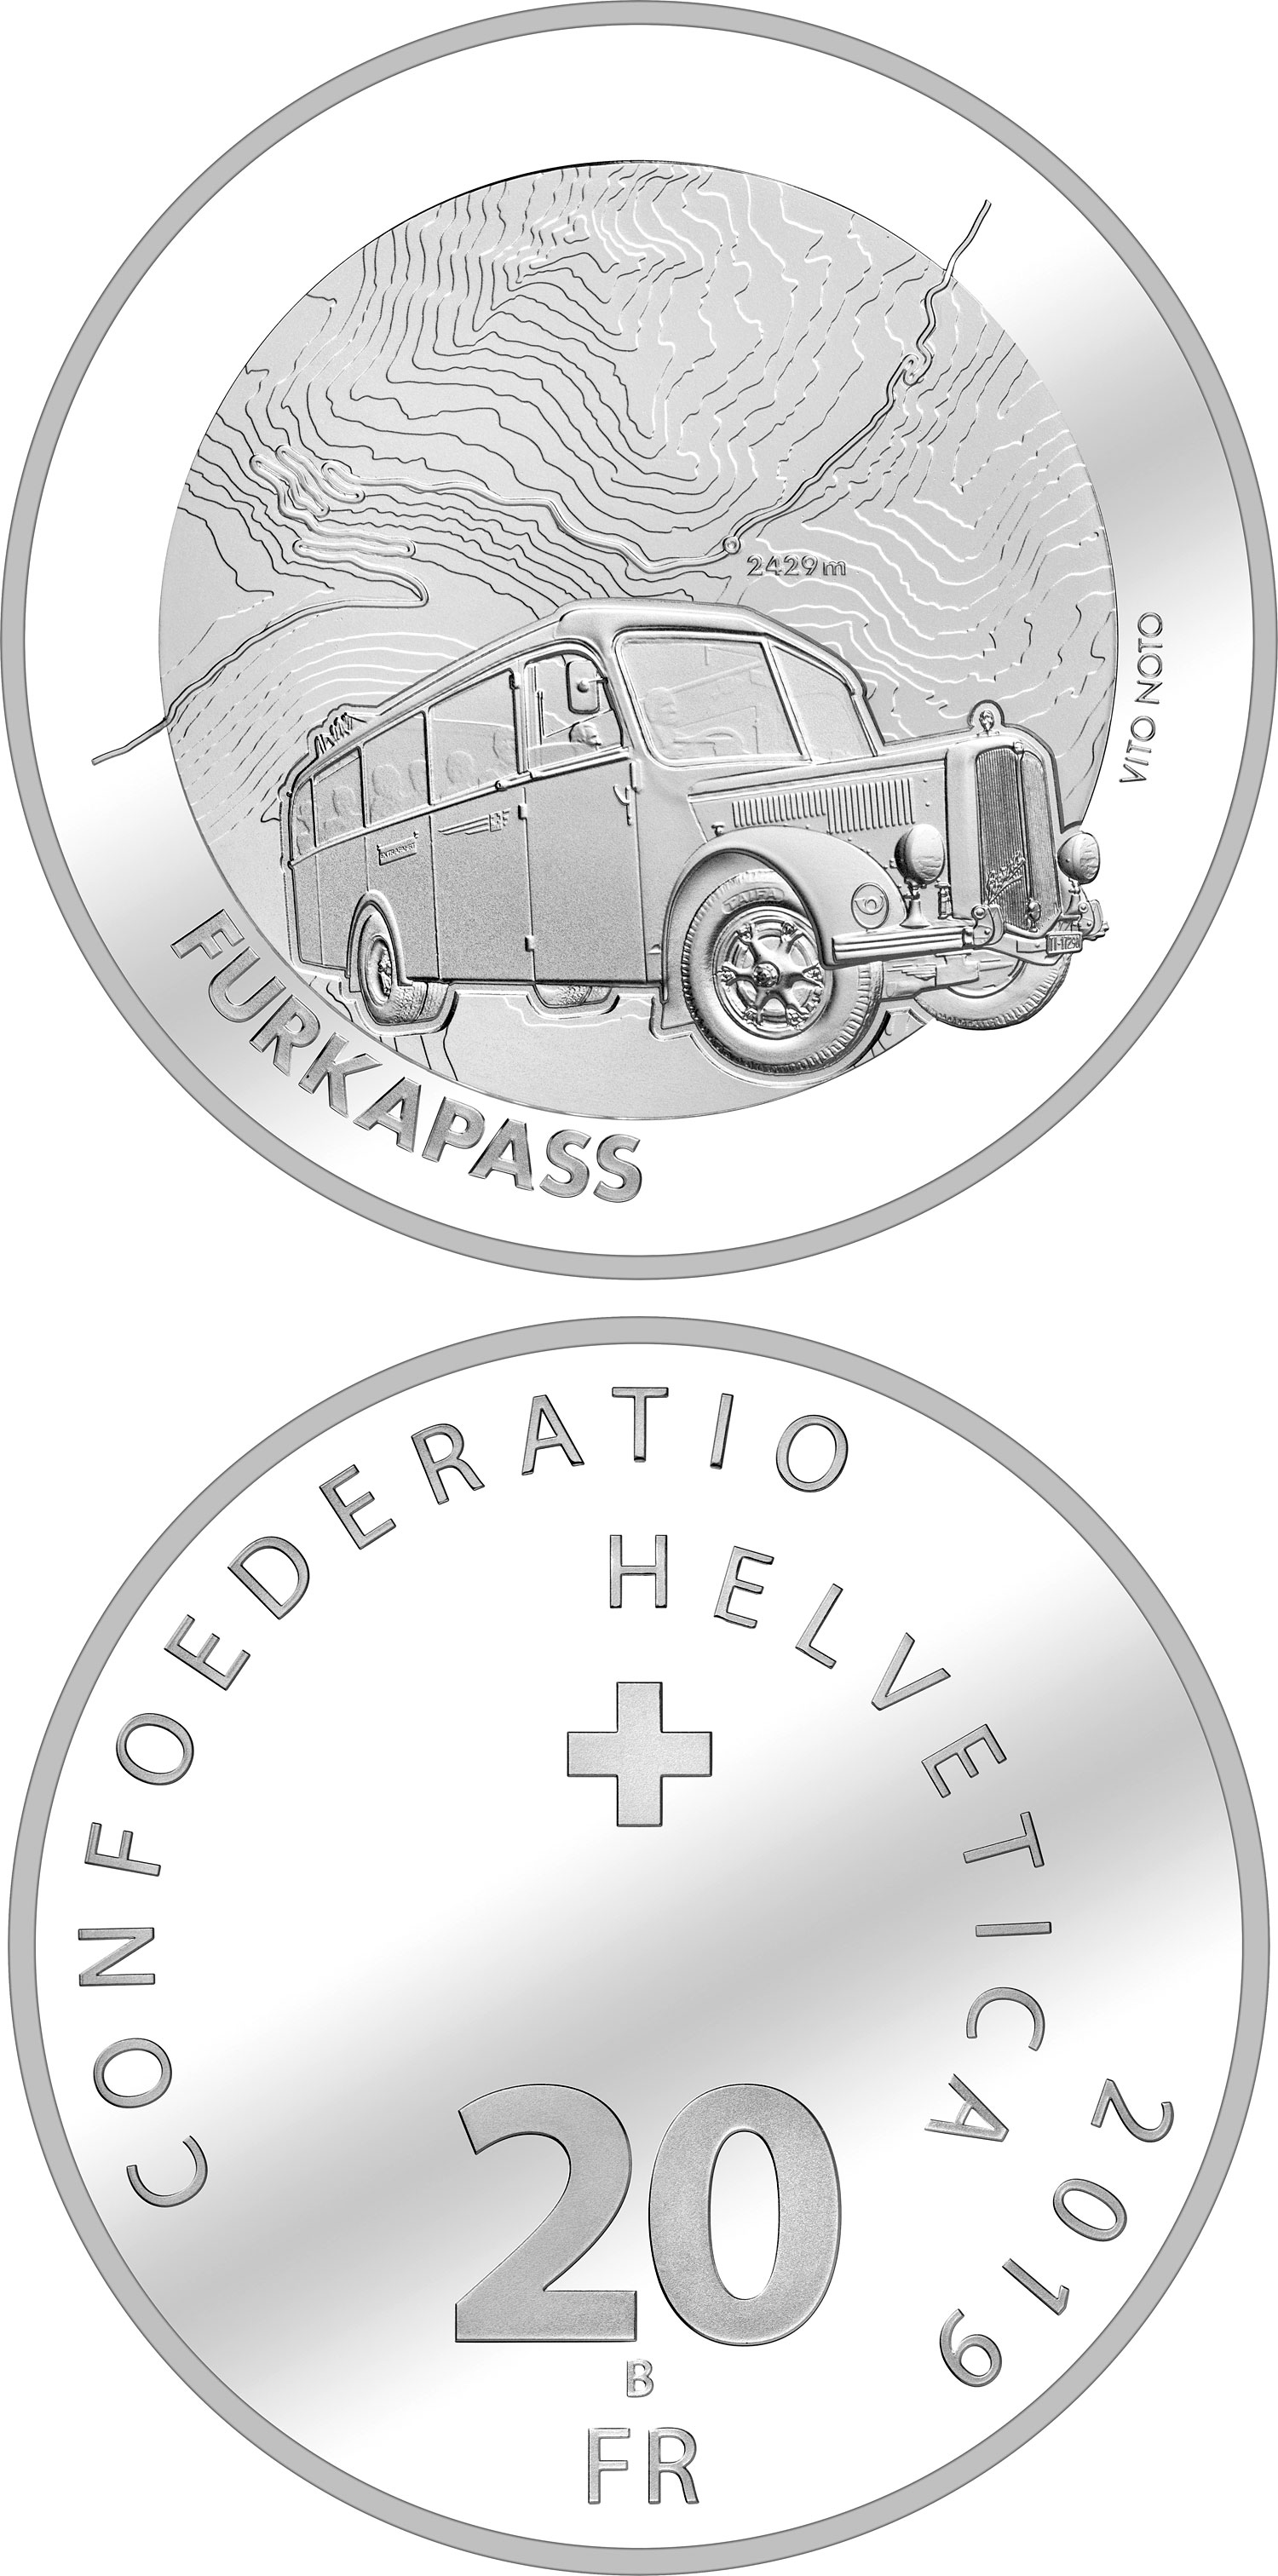 Image of 20 francs coin - Furka Pass | Switzerland 2019.  The Silver coin is of Proof, BU quality.